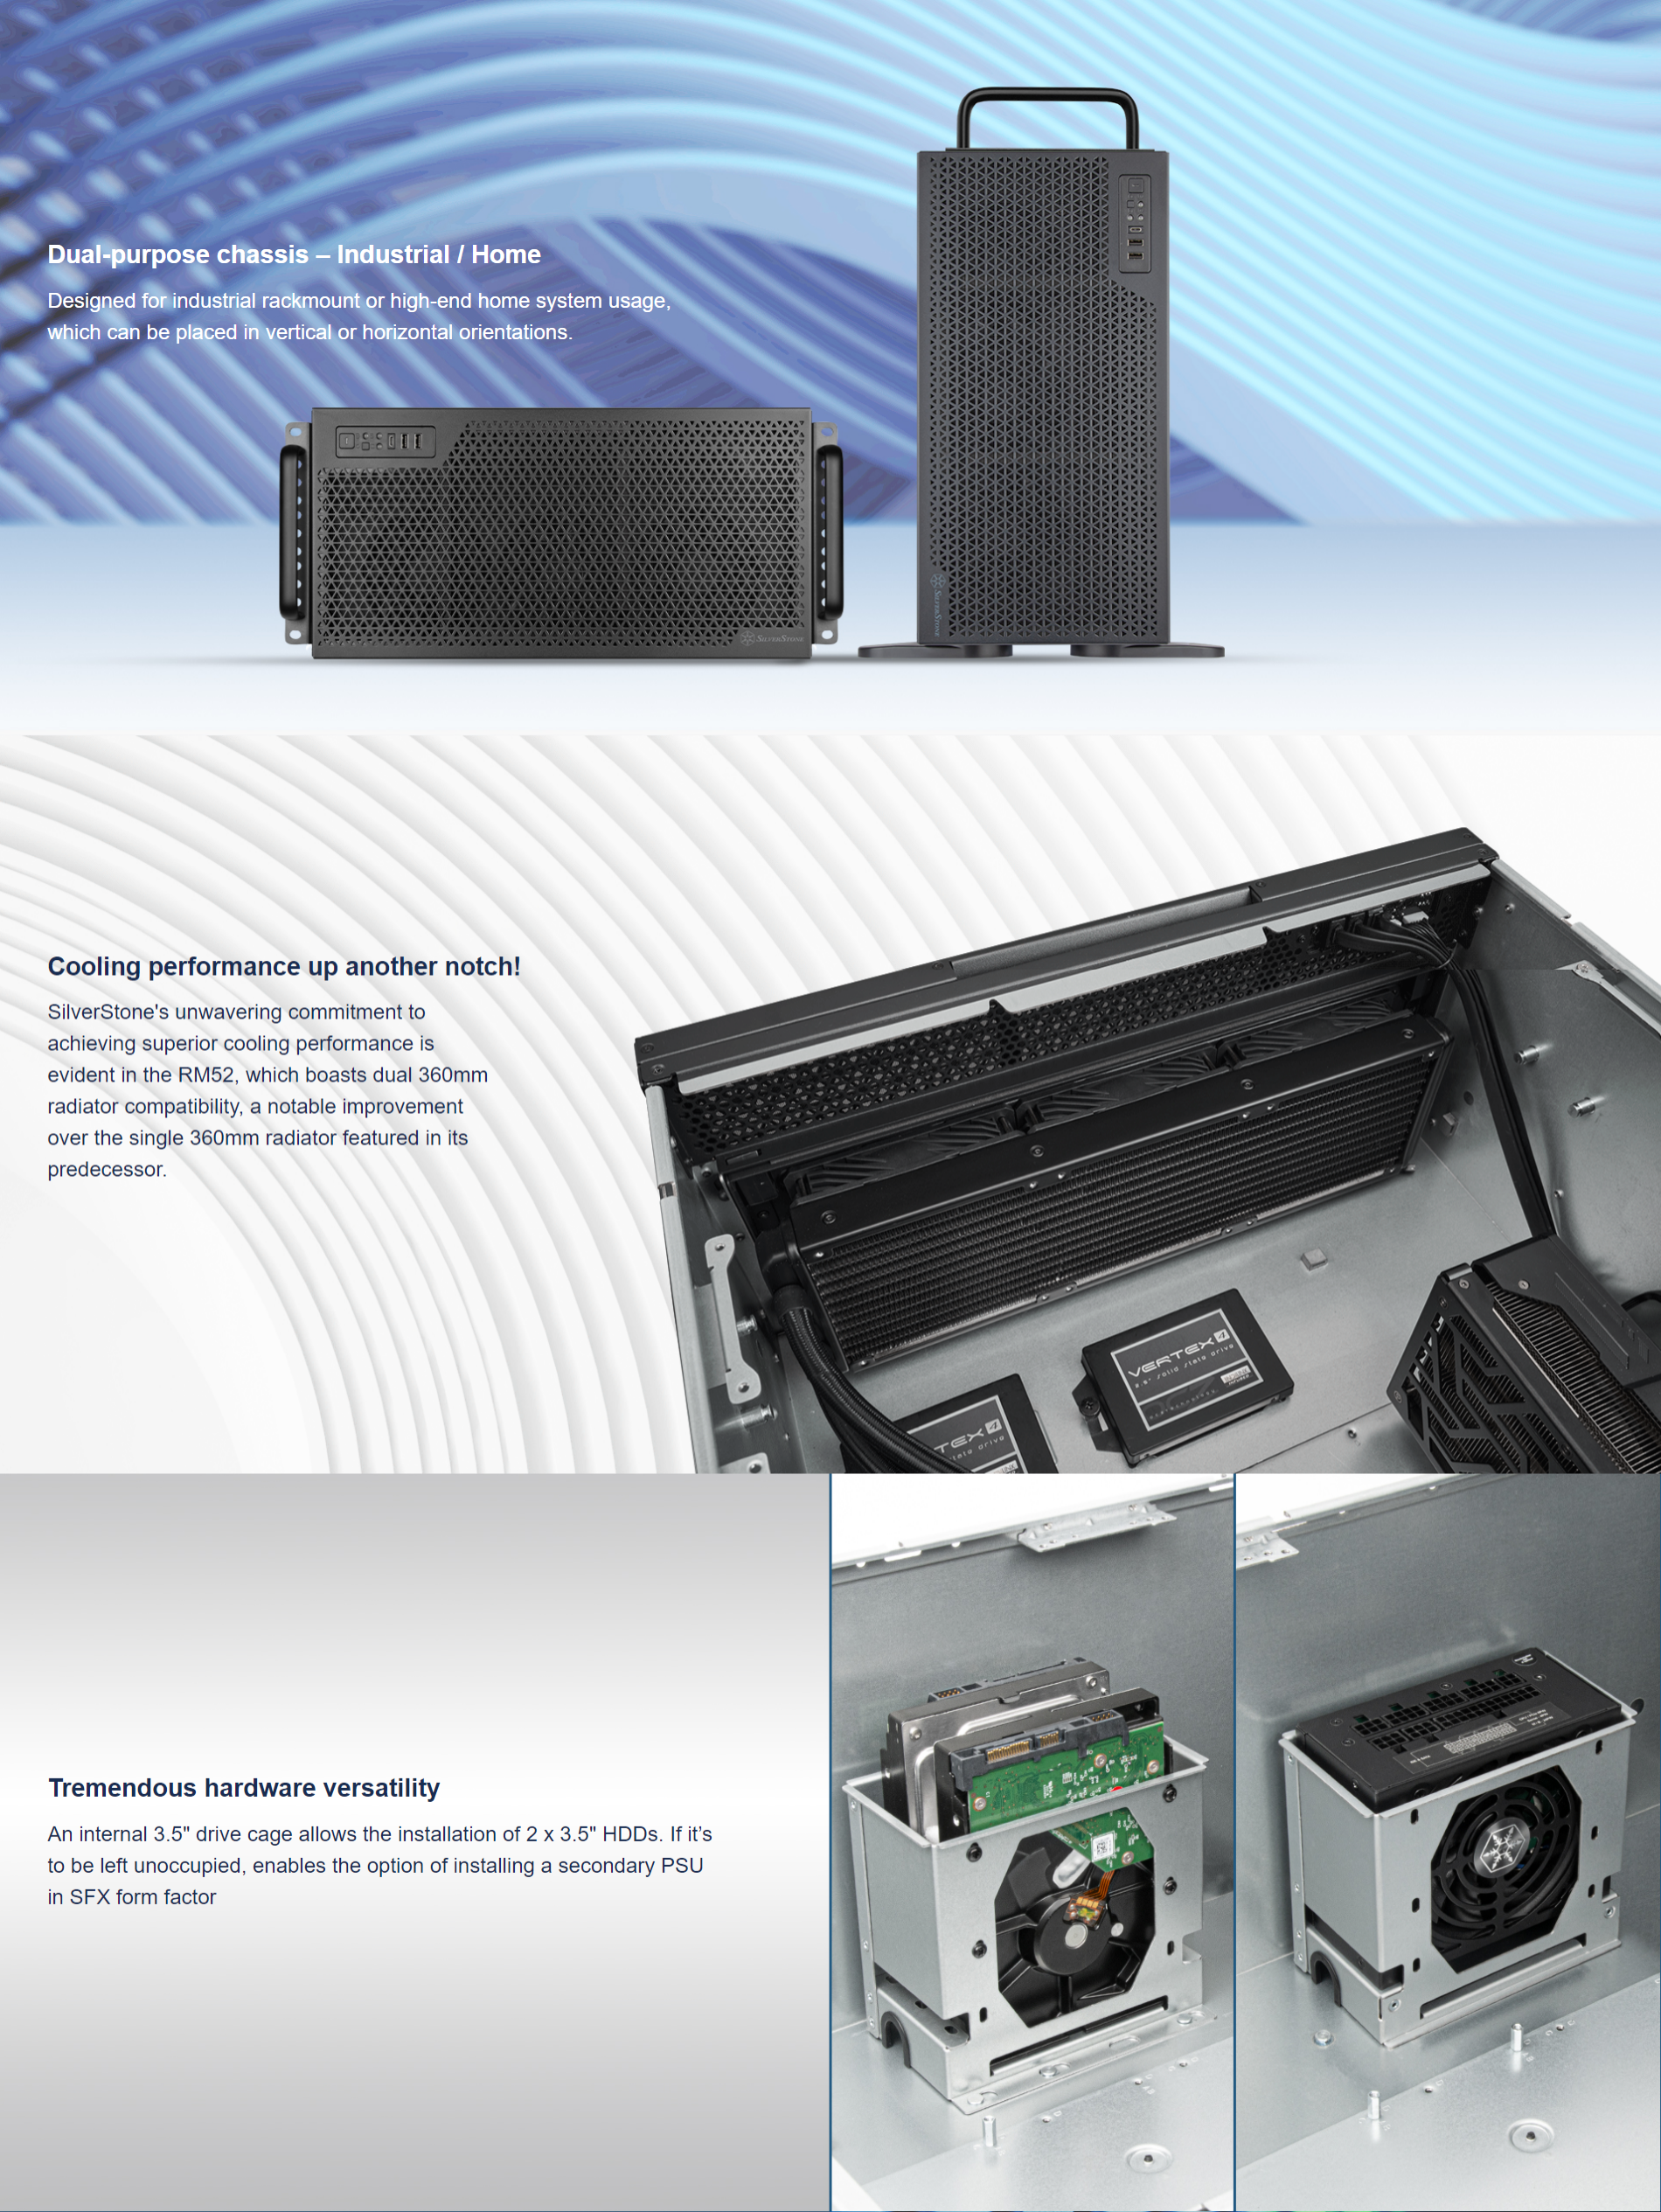 A large marketing image providing additional information about the product SilverStone RM52 5U Rackmount Case - Black - Additional alt info not provided